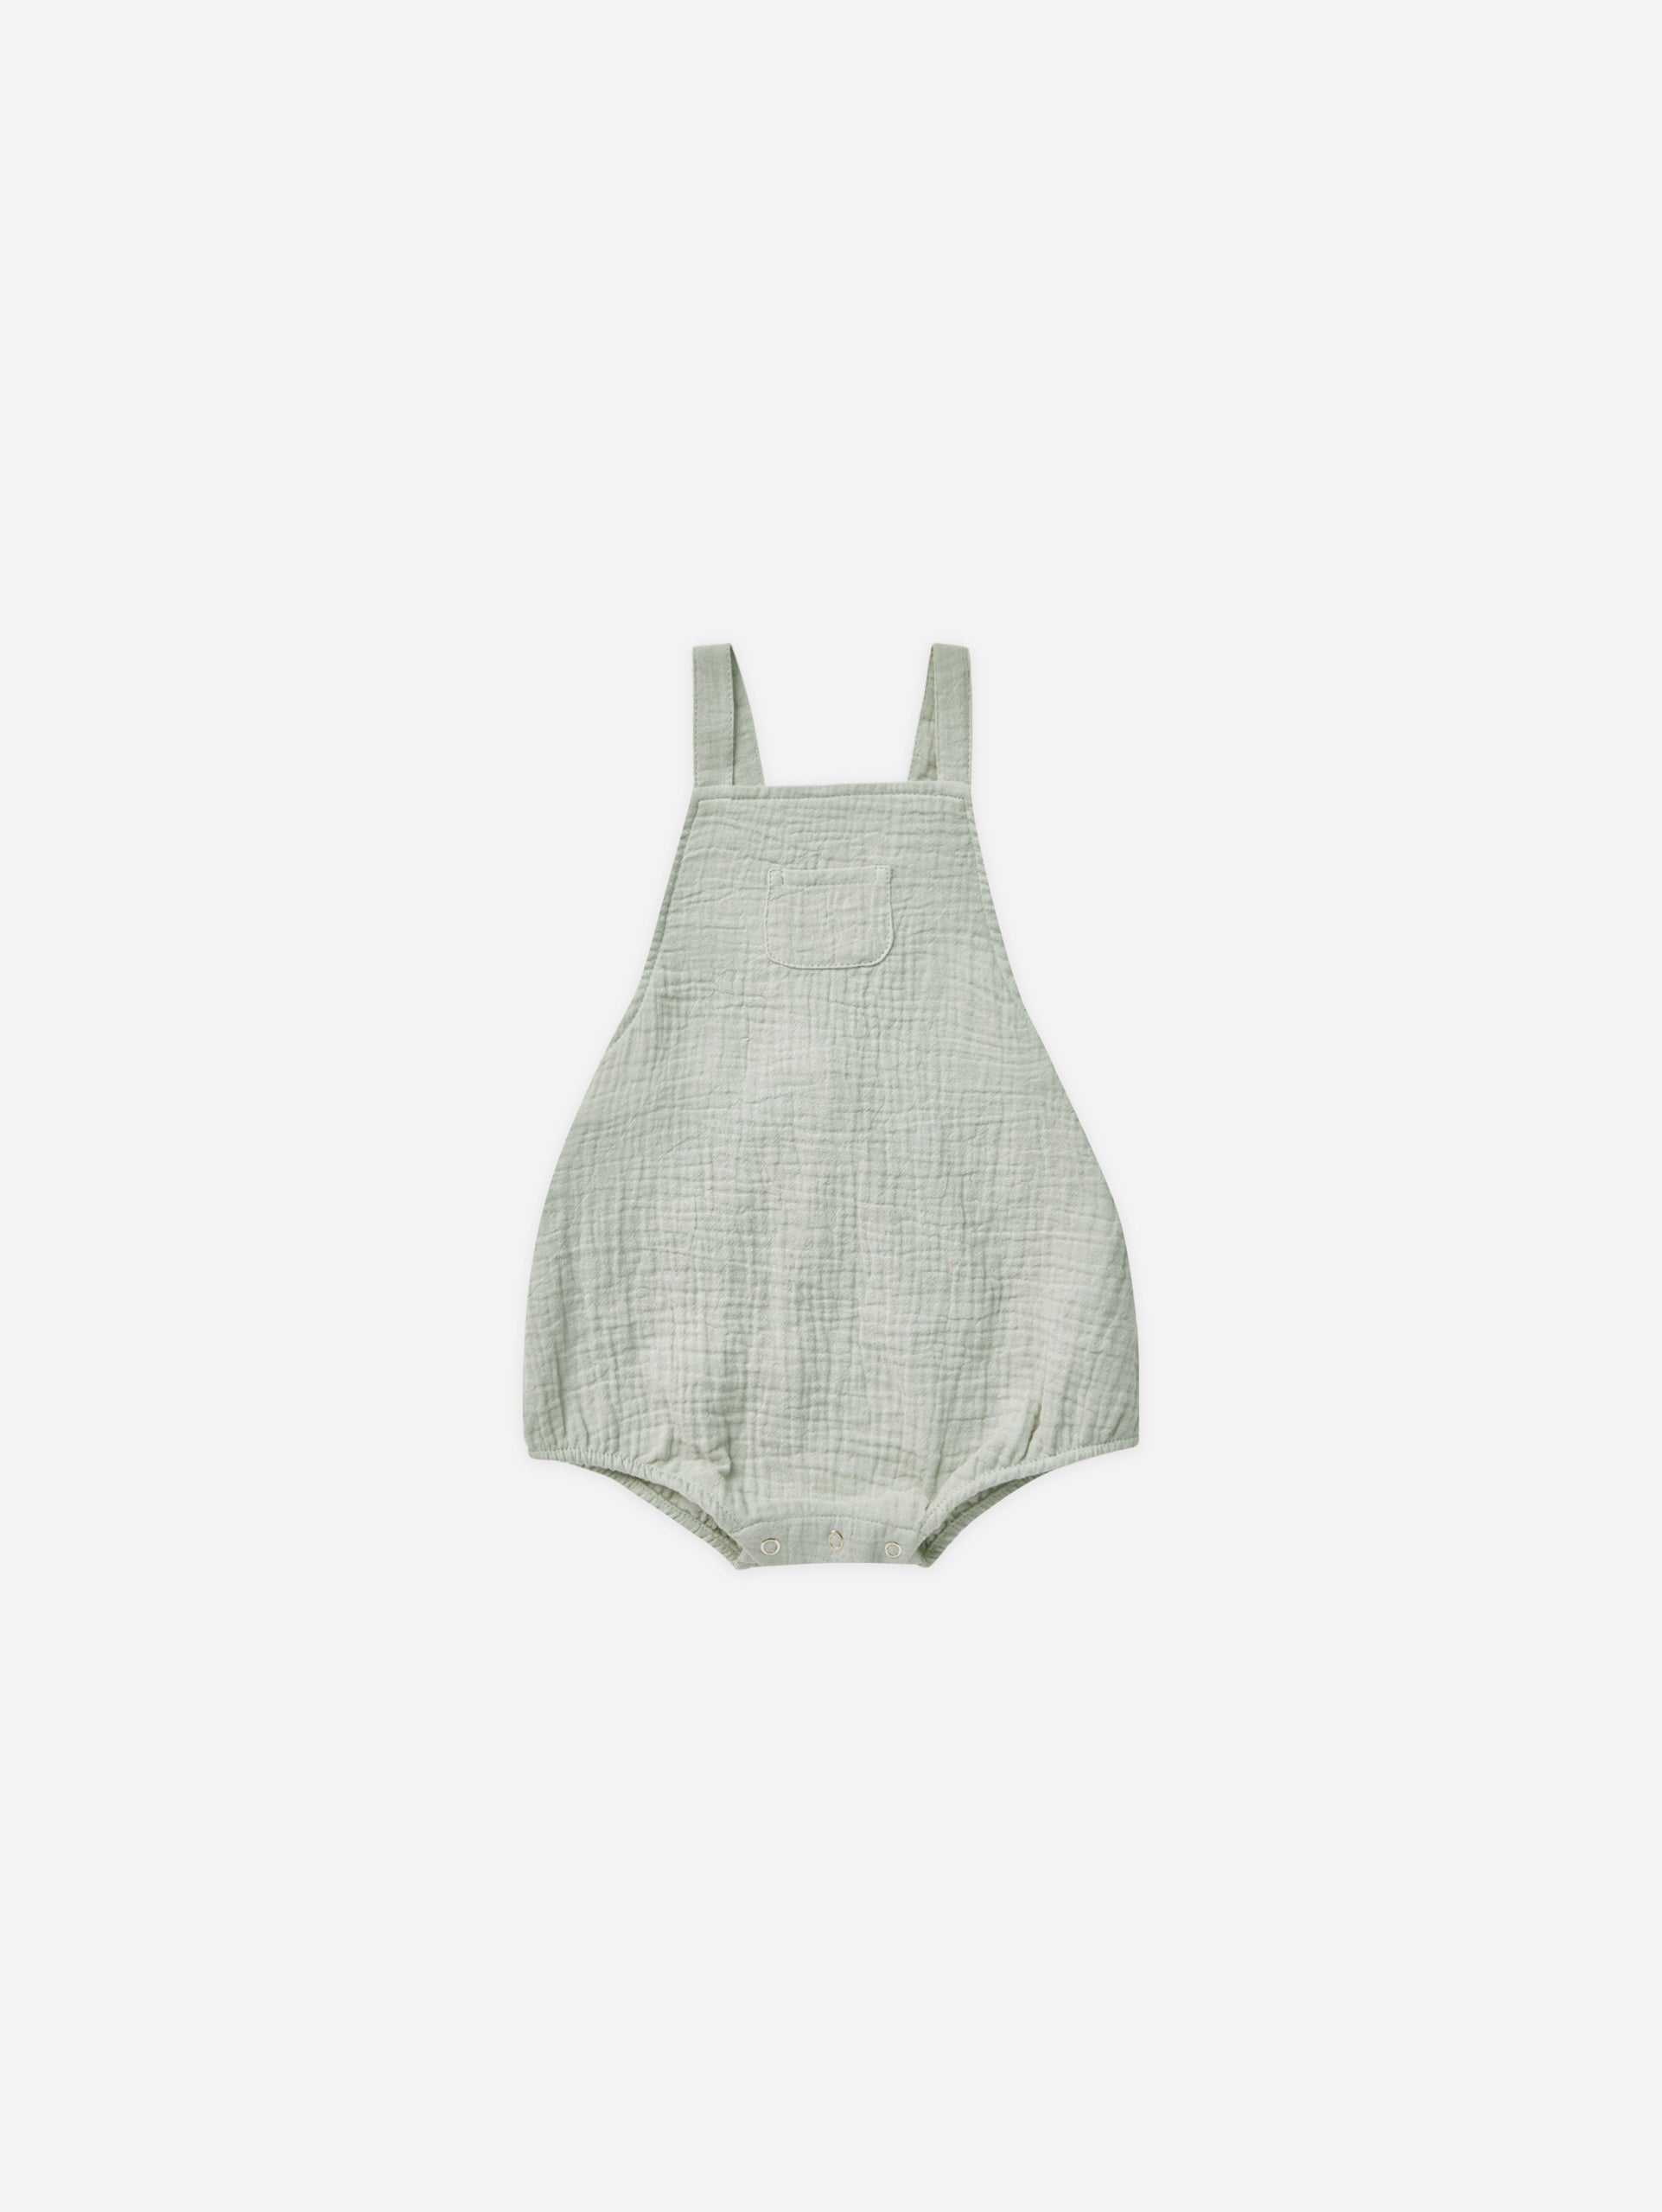 Criss Cross Romper || Seafoam - Rylee + Cru | Kids Clothes | Trendy Baby Clothes | Modern Infant Outfits |